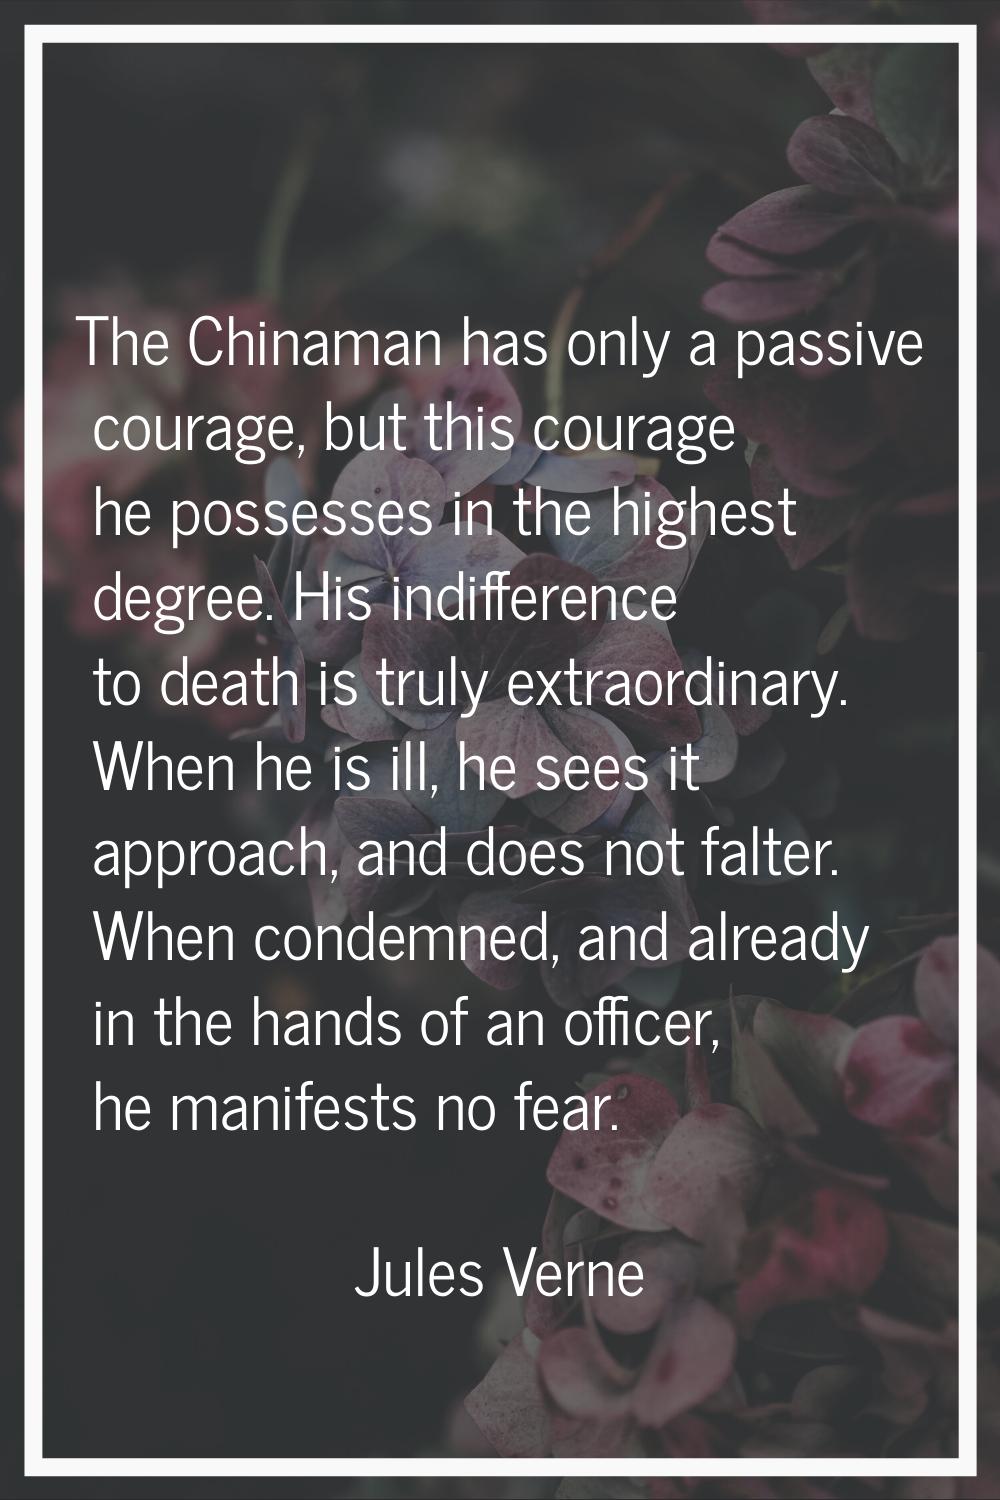 The Chinaman has only a passive courage, but this courage he possesses in the highest degree. His i